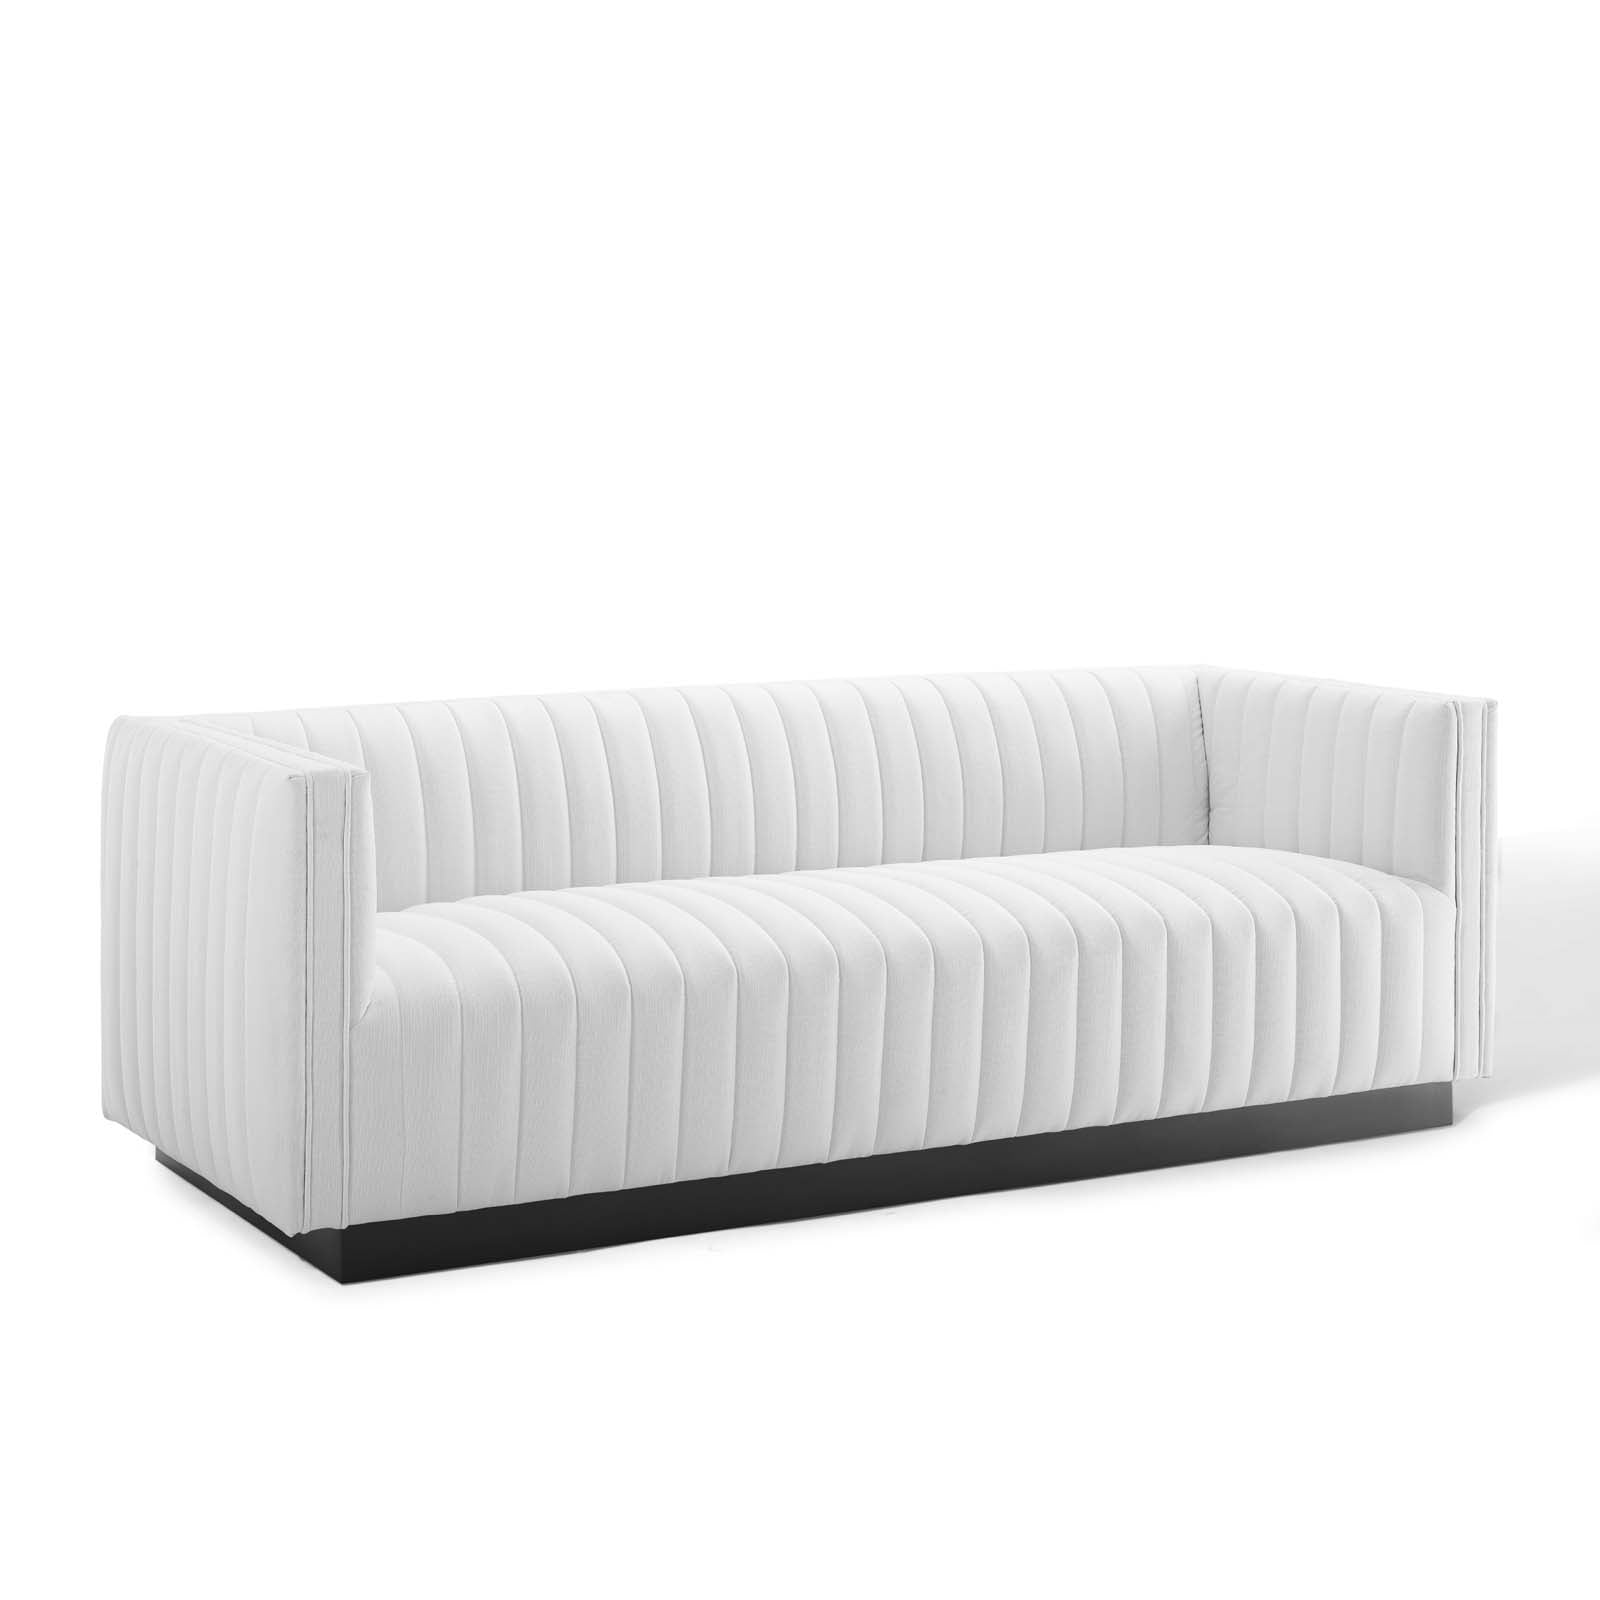 Conjure Tufted Upholstered Fabric Sofa - East Shore Modern Home Furnishings